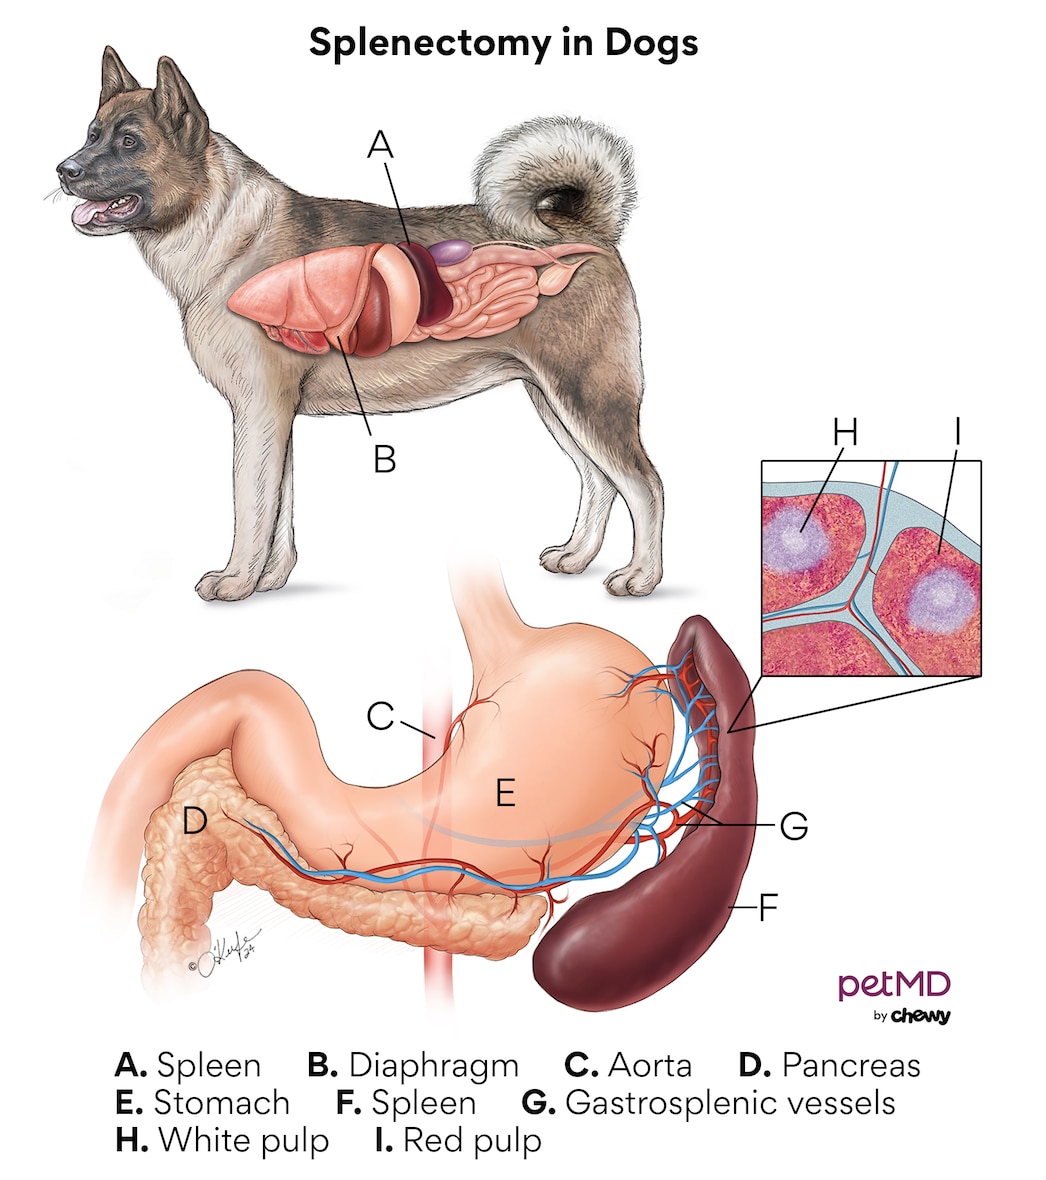 A diagram of the anatomy of the spleen in dogs.